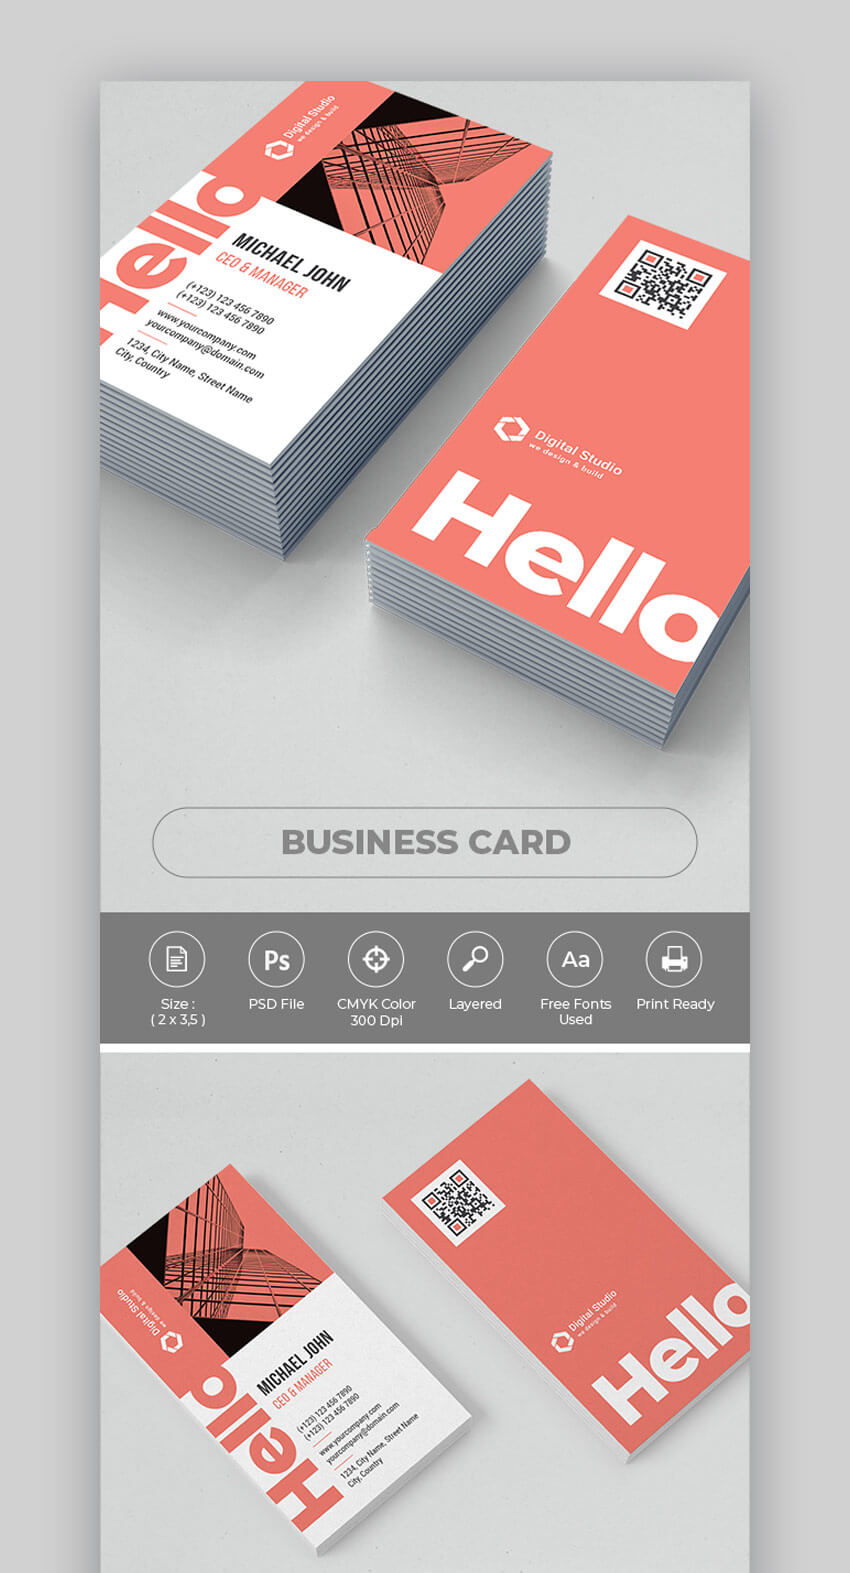 15+ Best Free Photoshop Psd Business Card Templates With Regard To Visiting Card Templates For Photoshop